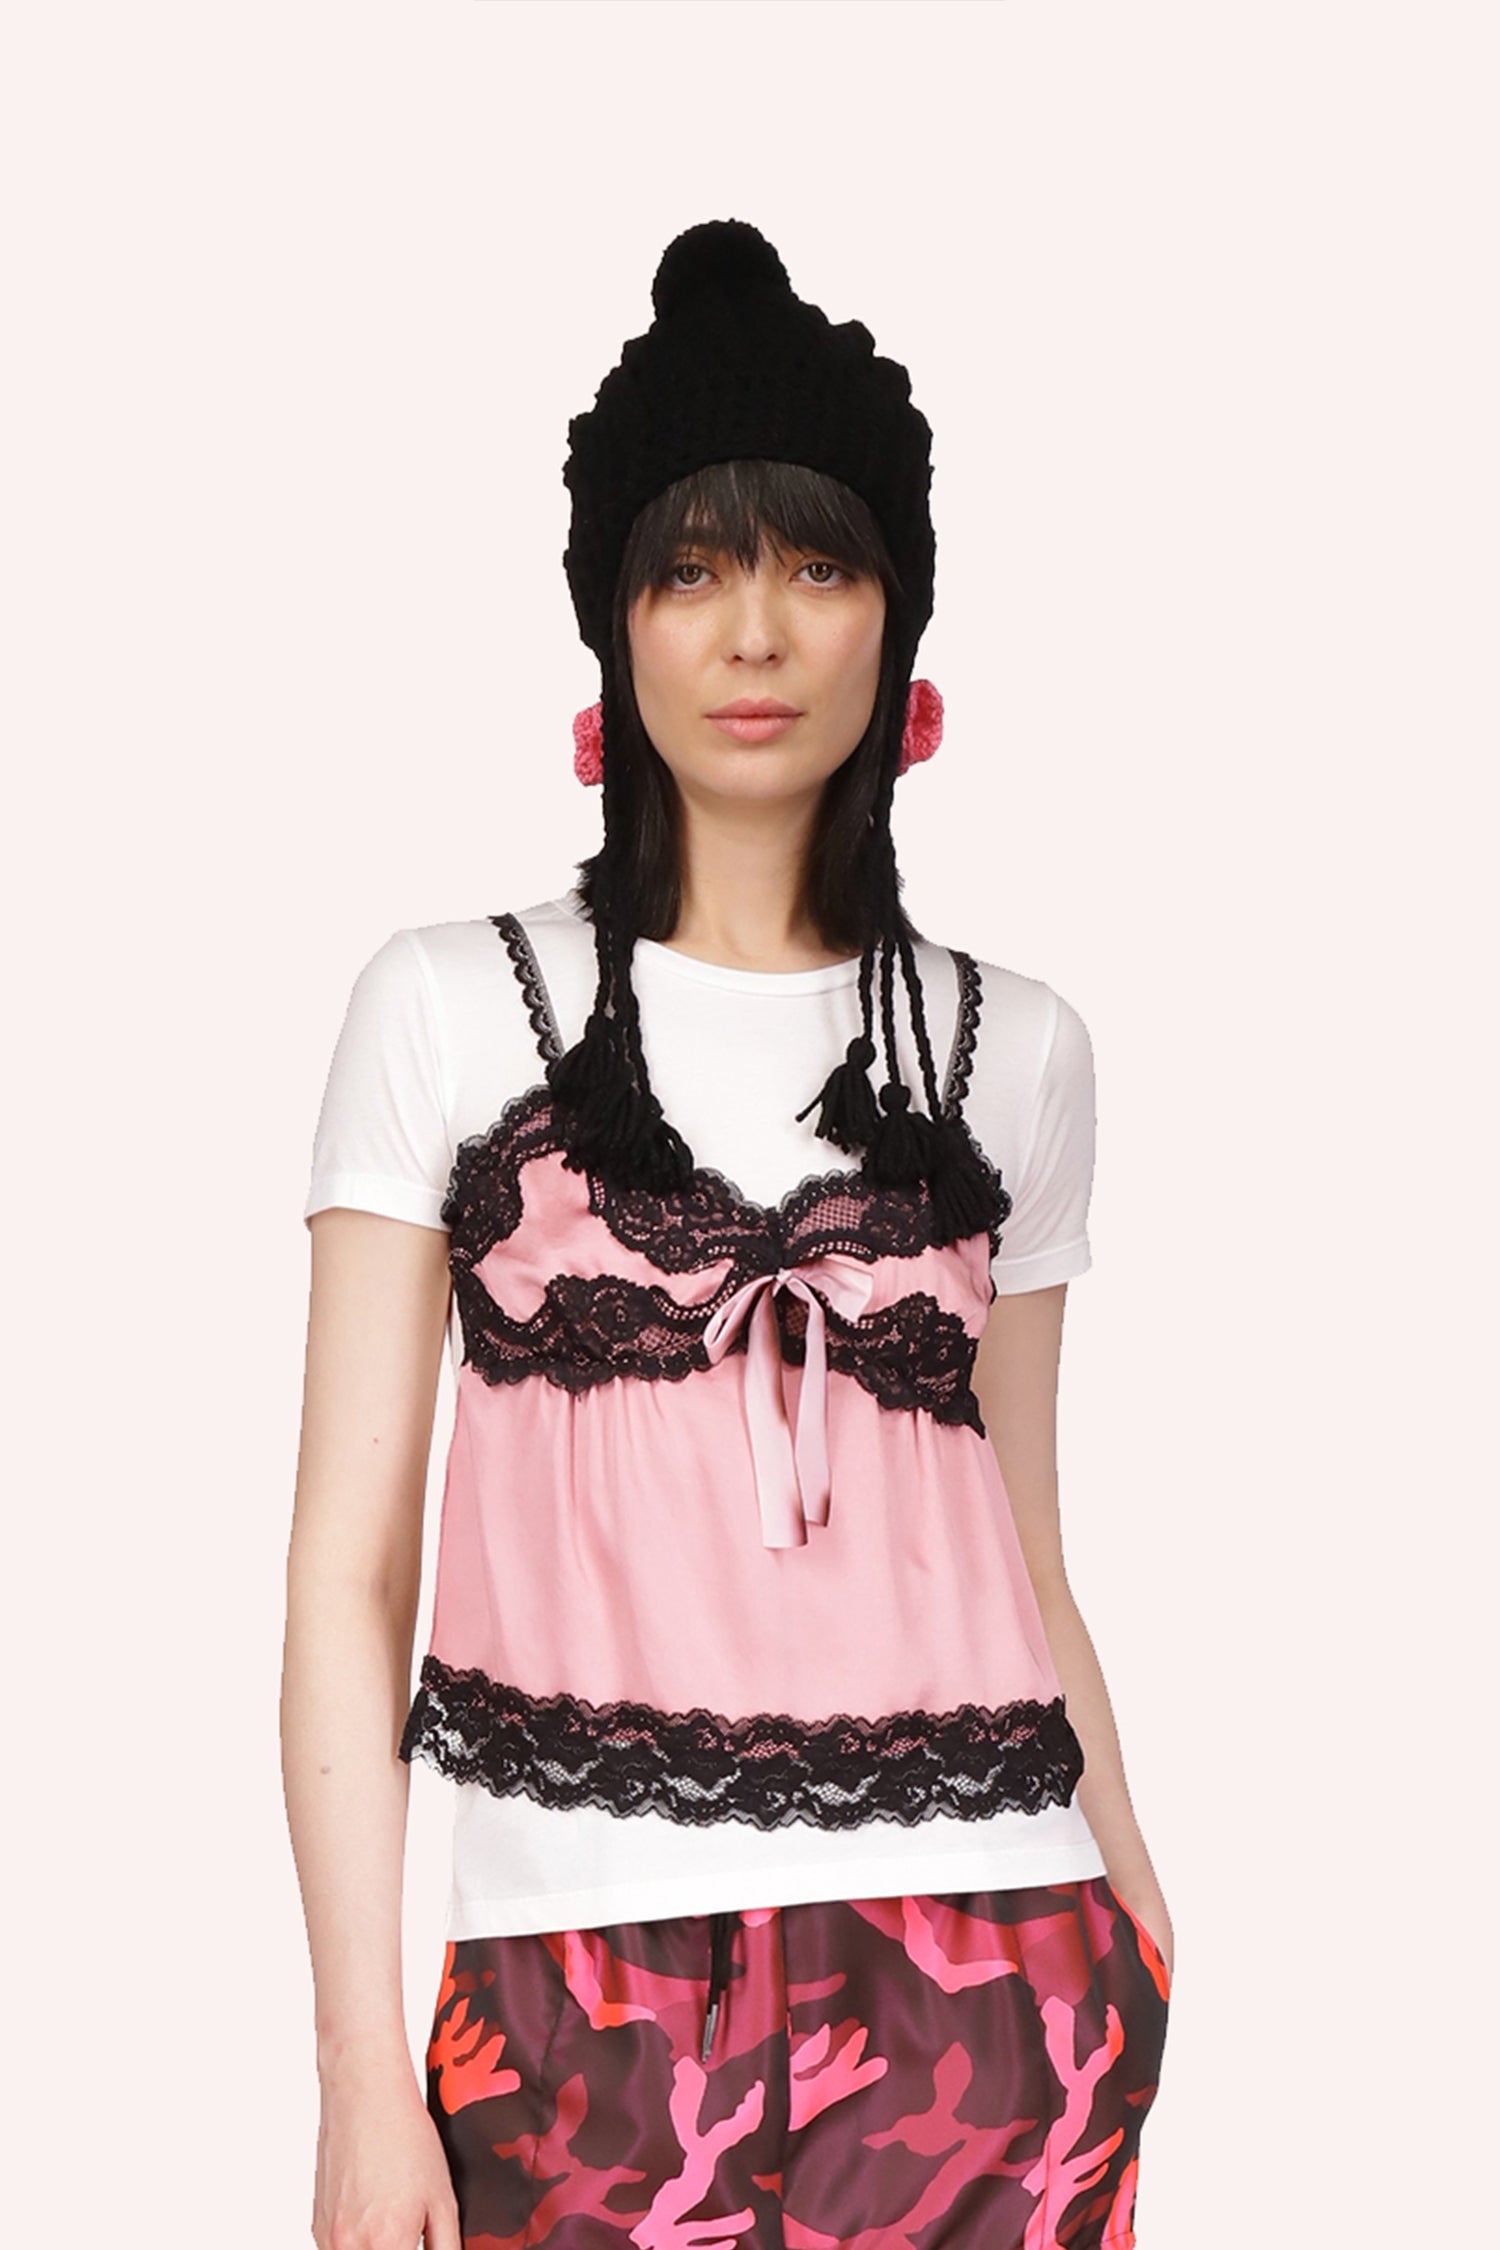 Sleeveless tee, backless, light rose, black lace borders, under breast, 2 straps, V-collar, pink ribbon middle chest